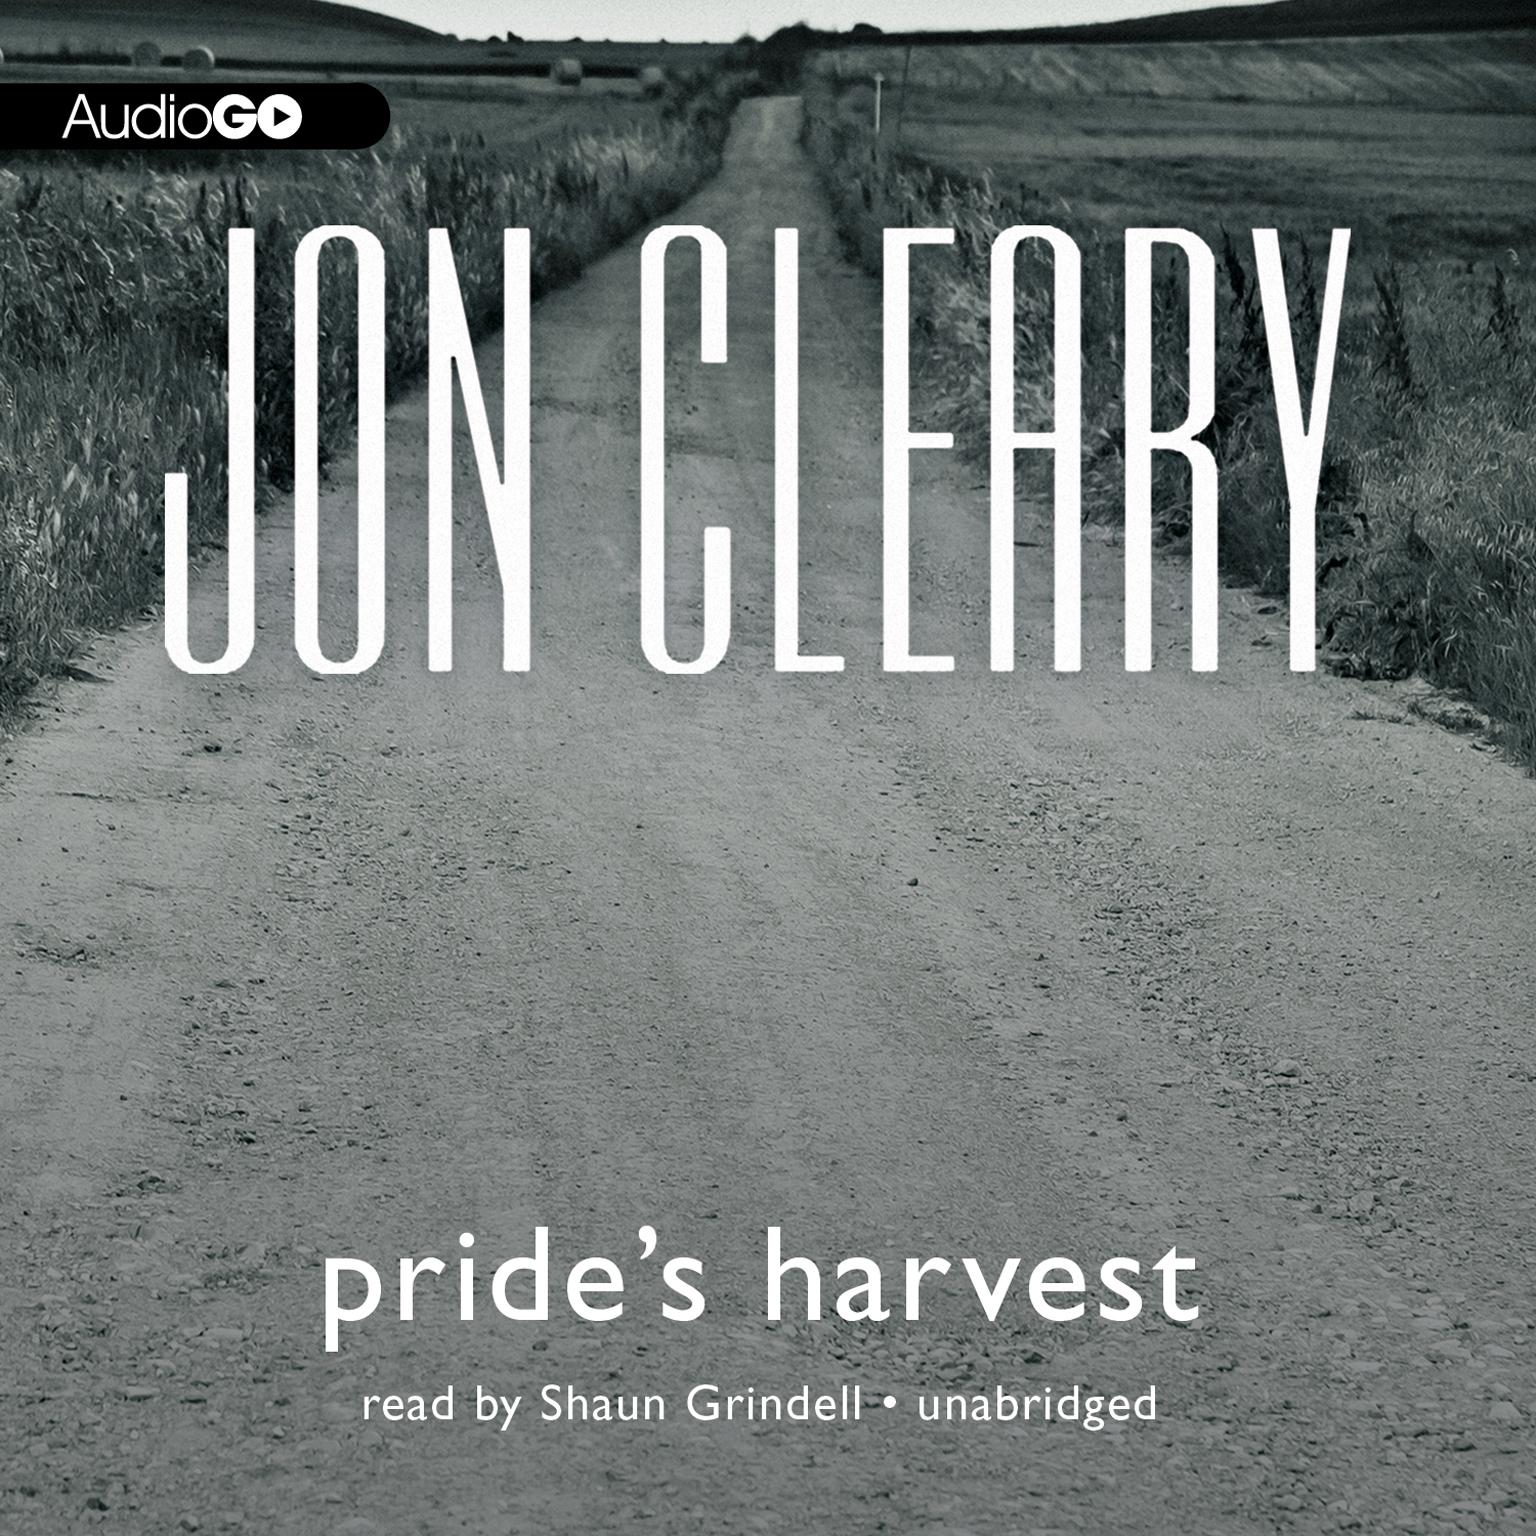 Pride’s Harvest Audiobook, by Jon Cleary